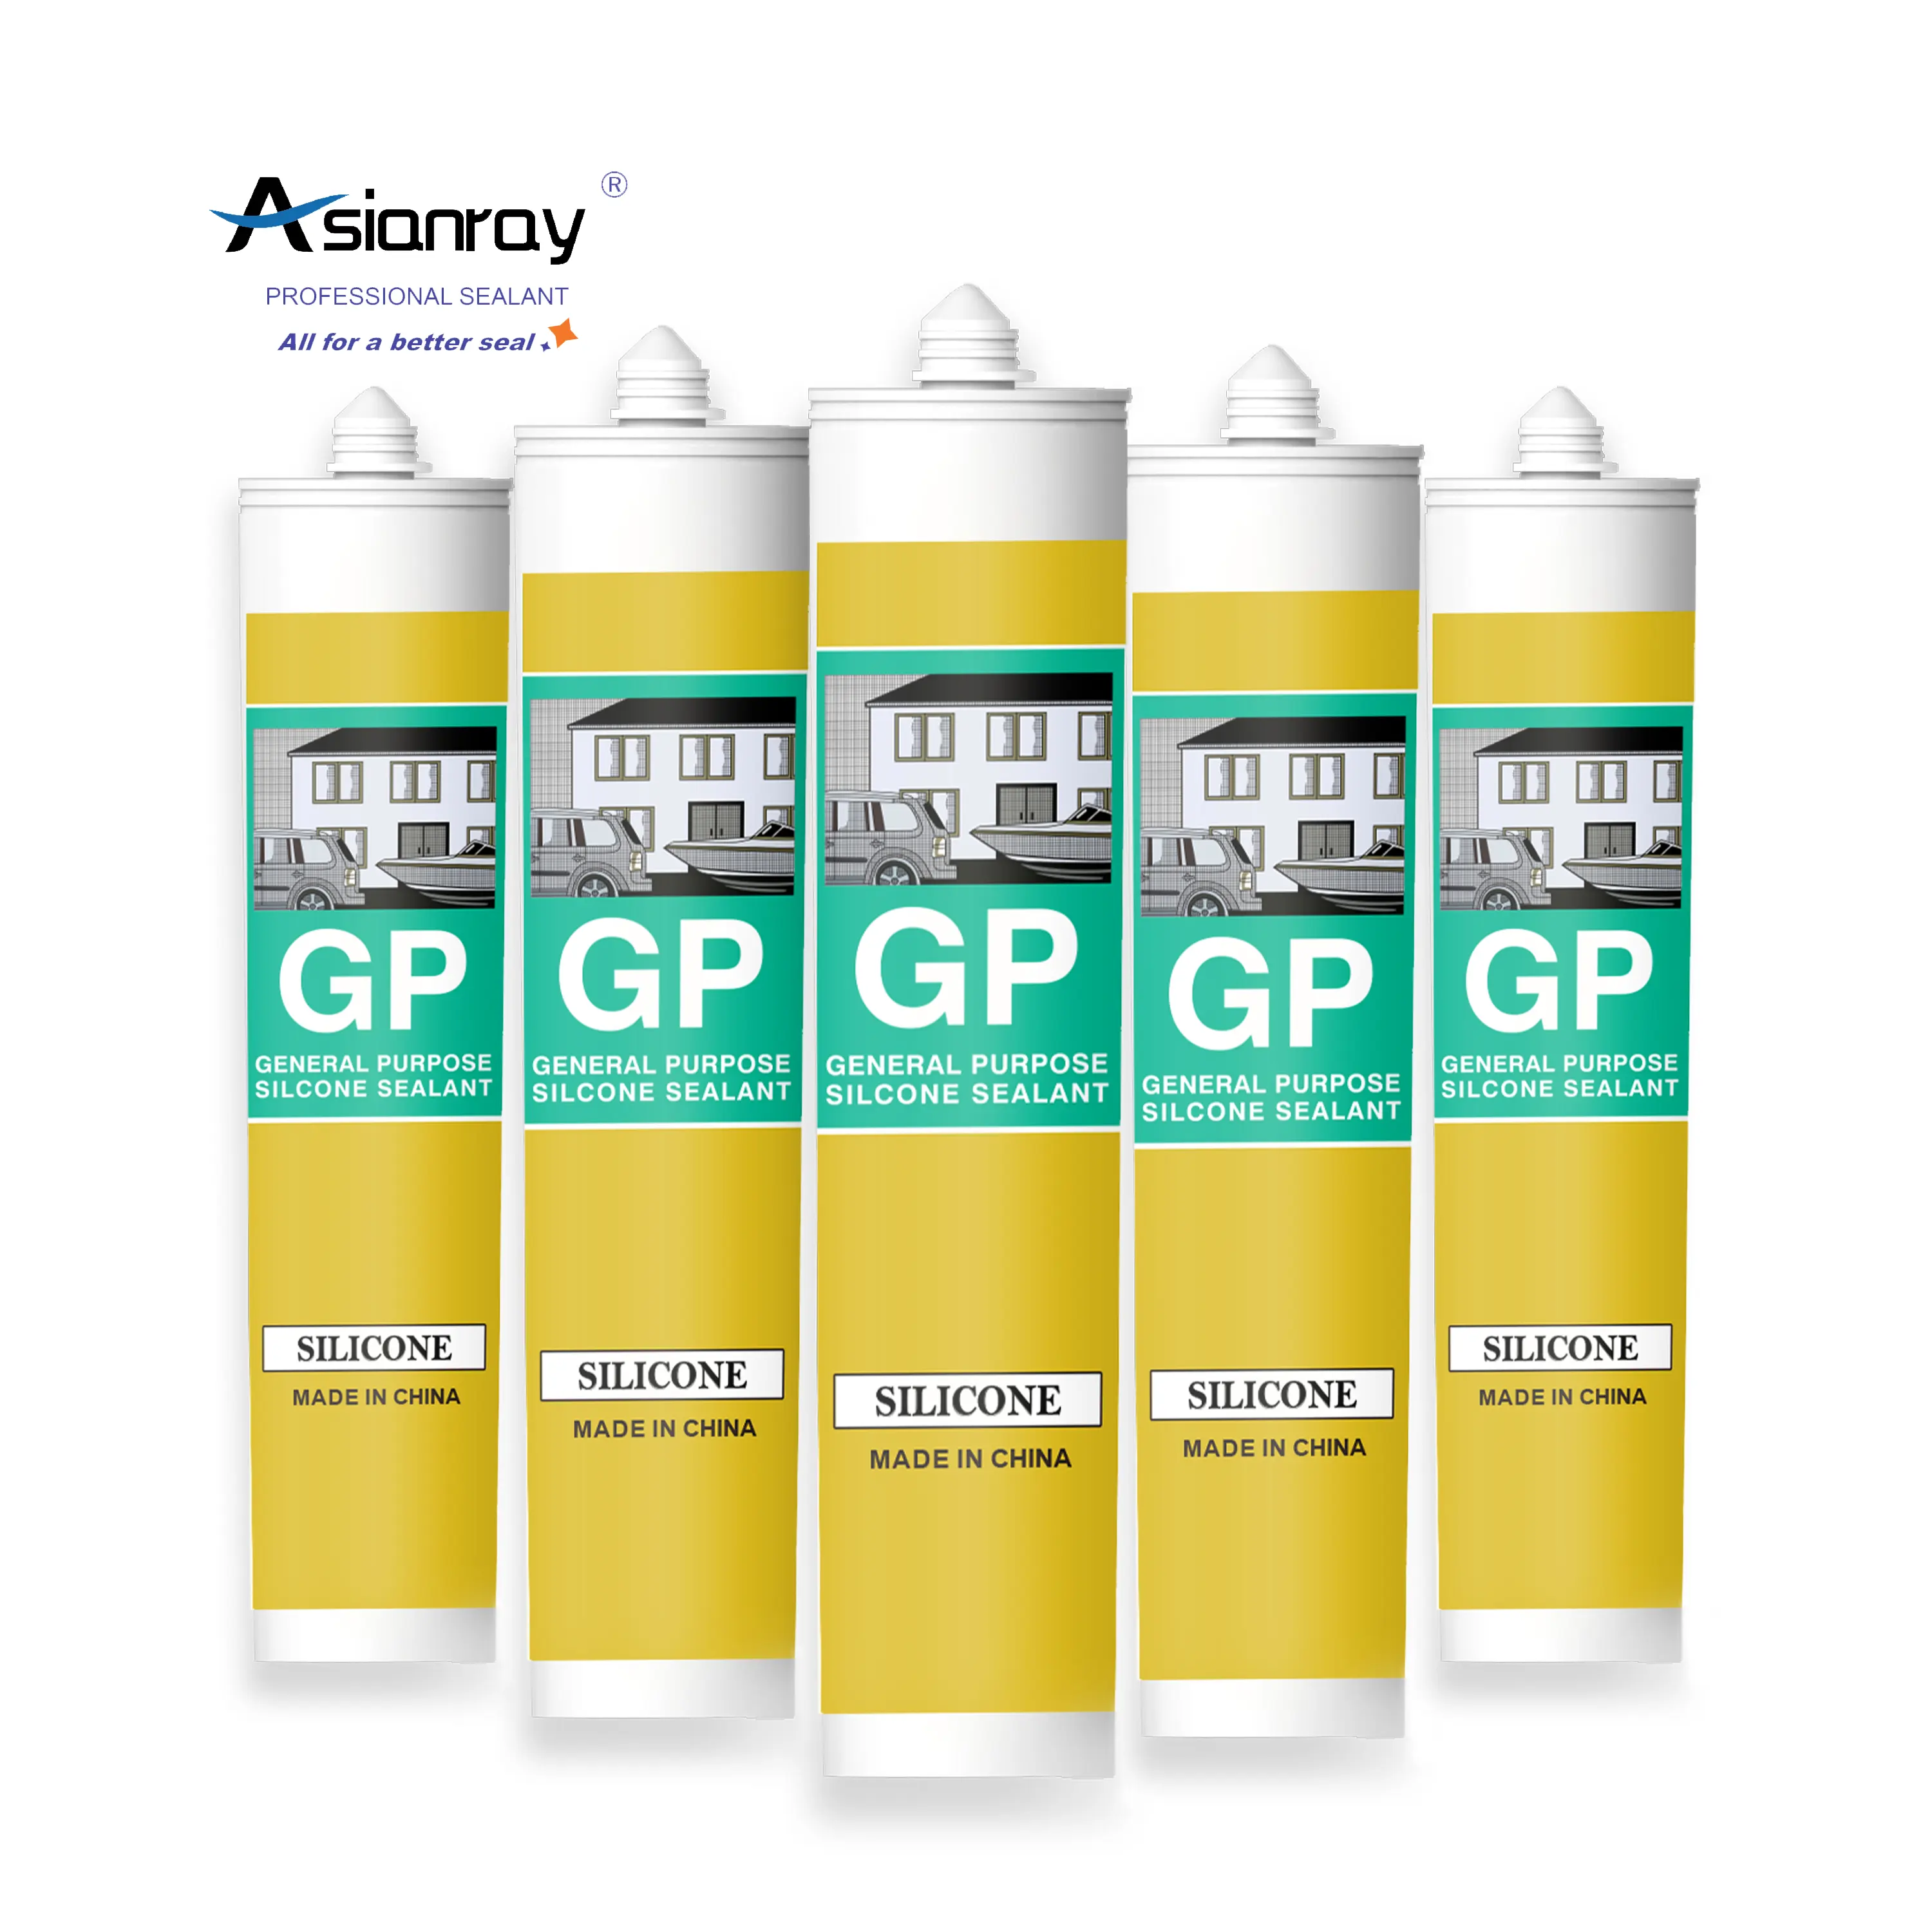 GP silicon manufacturer of good quality silicone General Purpose Silicone Sealant Adhesive for construction